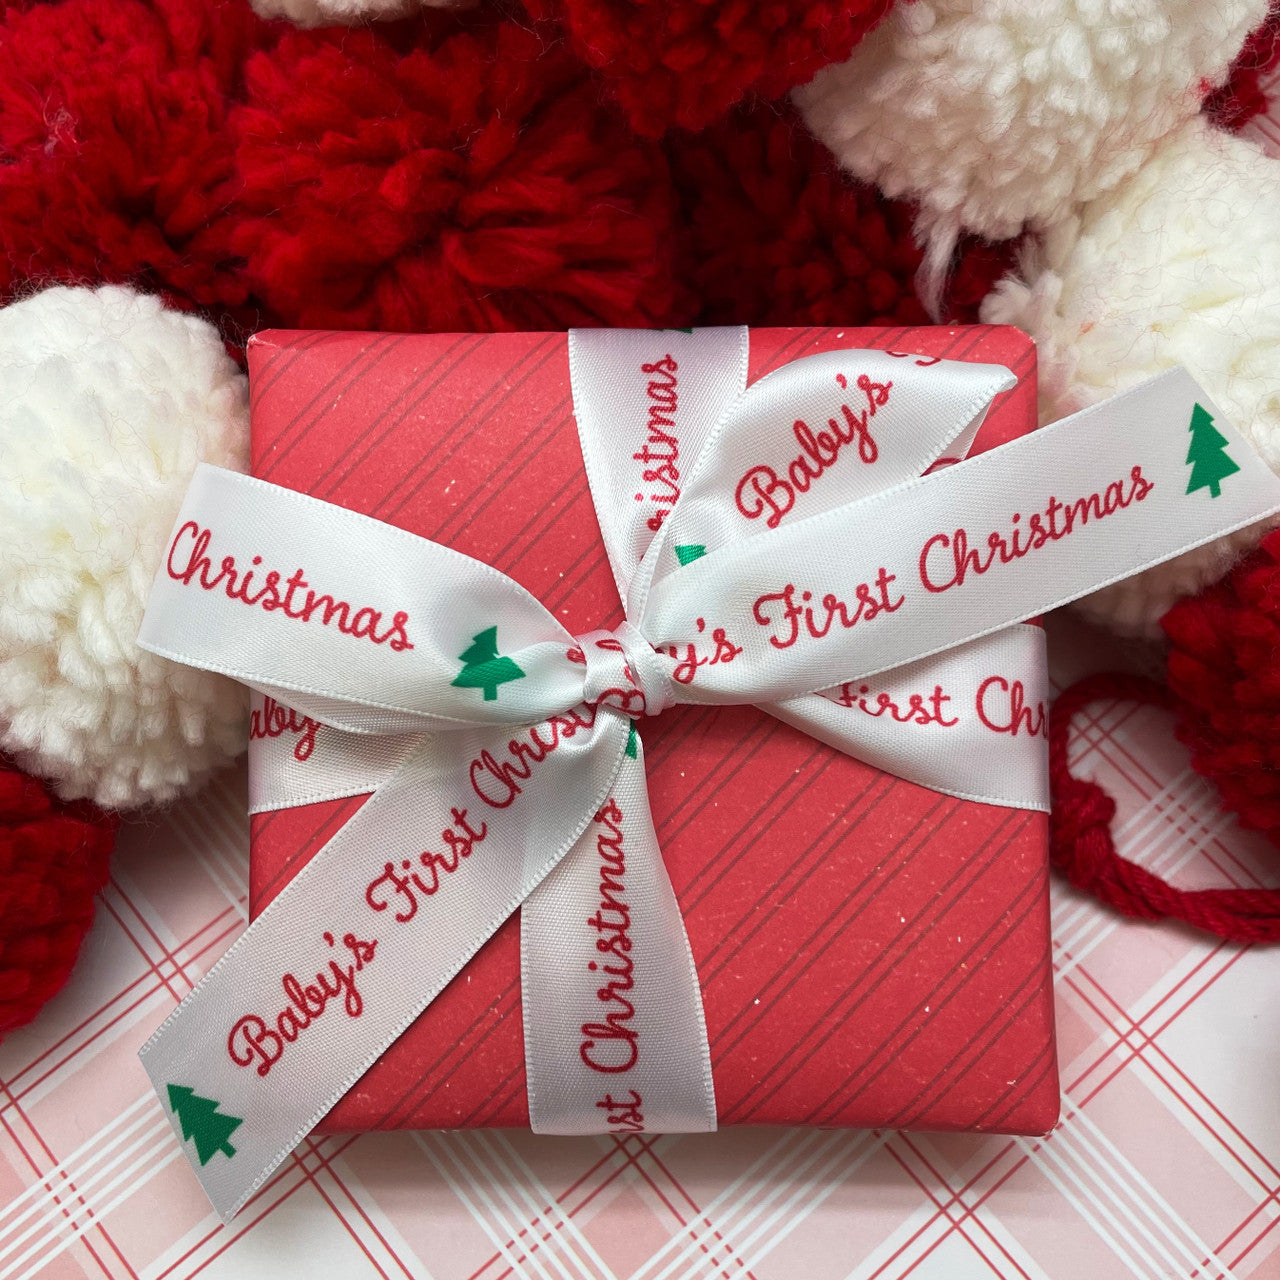 Our Baby's first Christmas ribbon is the perfect tie for Baby's gifts large and small! 